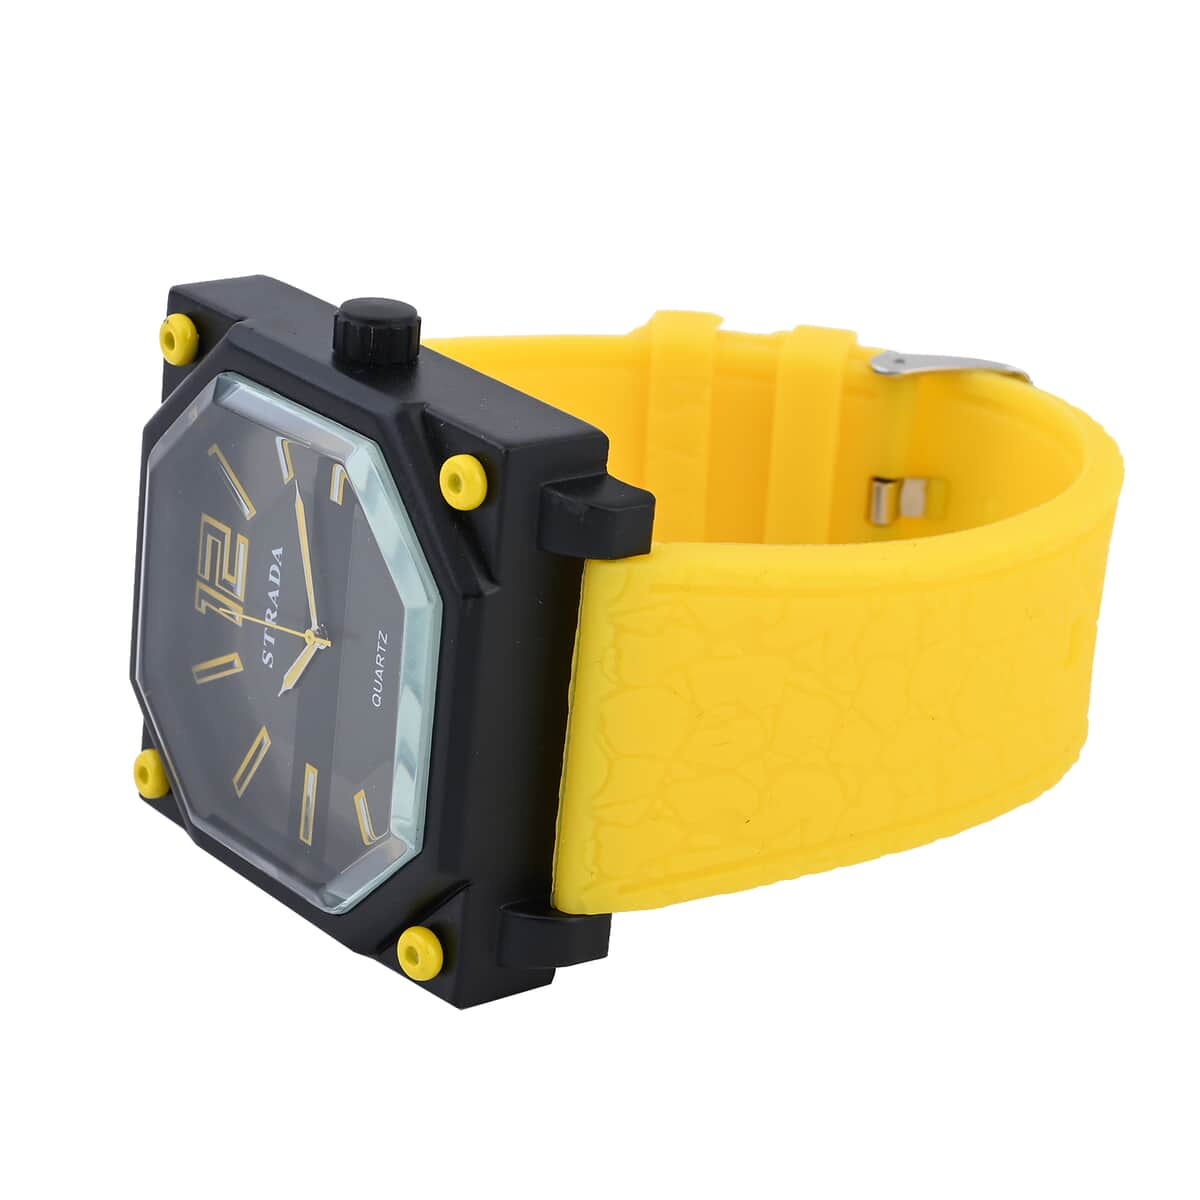 Strada Japanese Movement Octagonal Dial Sports Watch with Yellow Silicone Strap image number 3